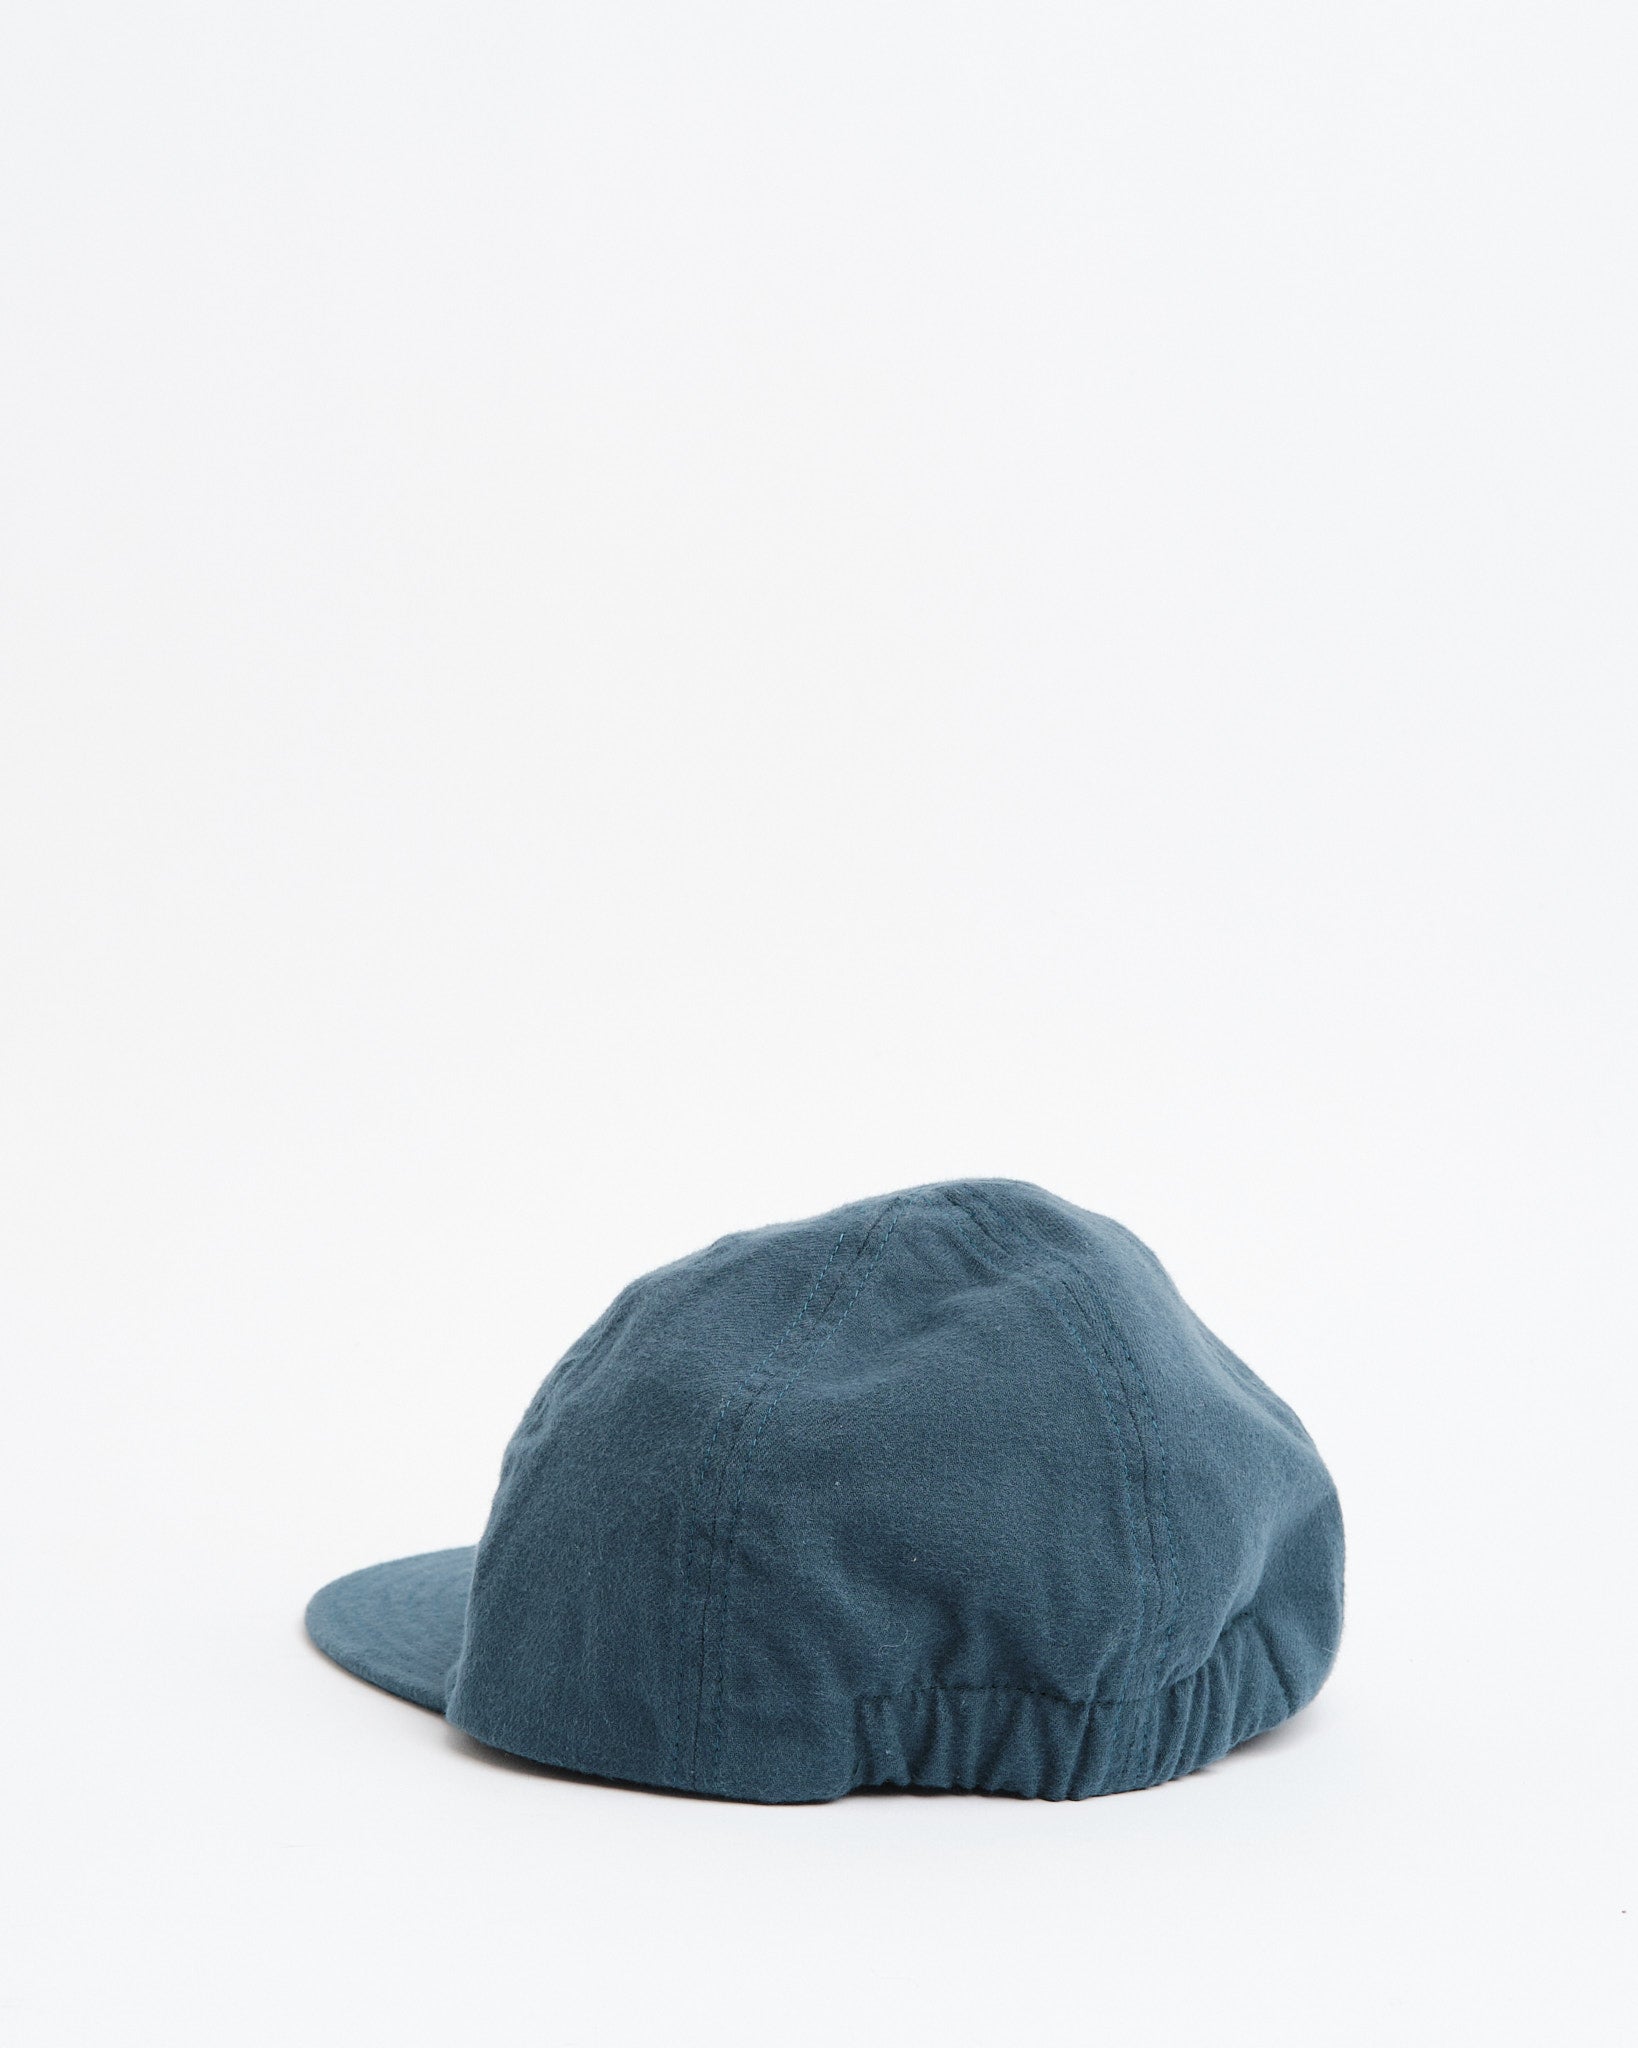 Classic 6 Panel Cap Teal Blue - Meadow